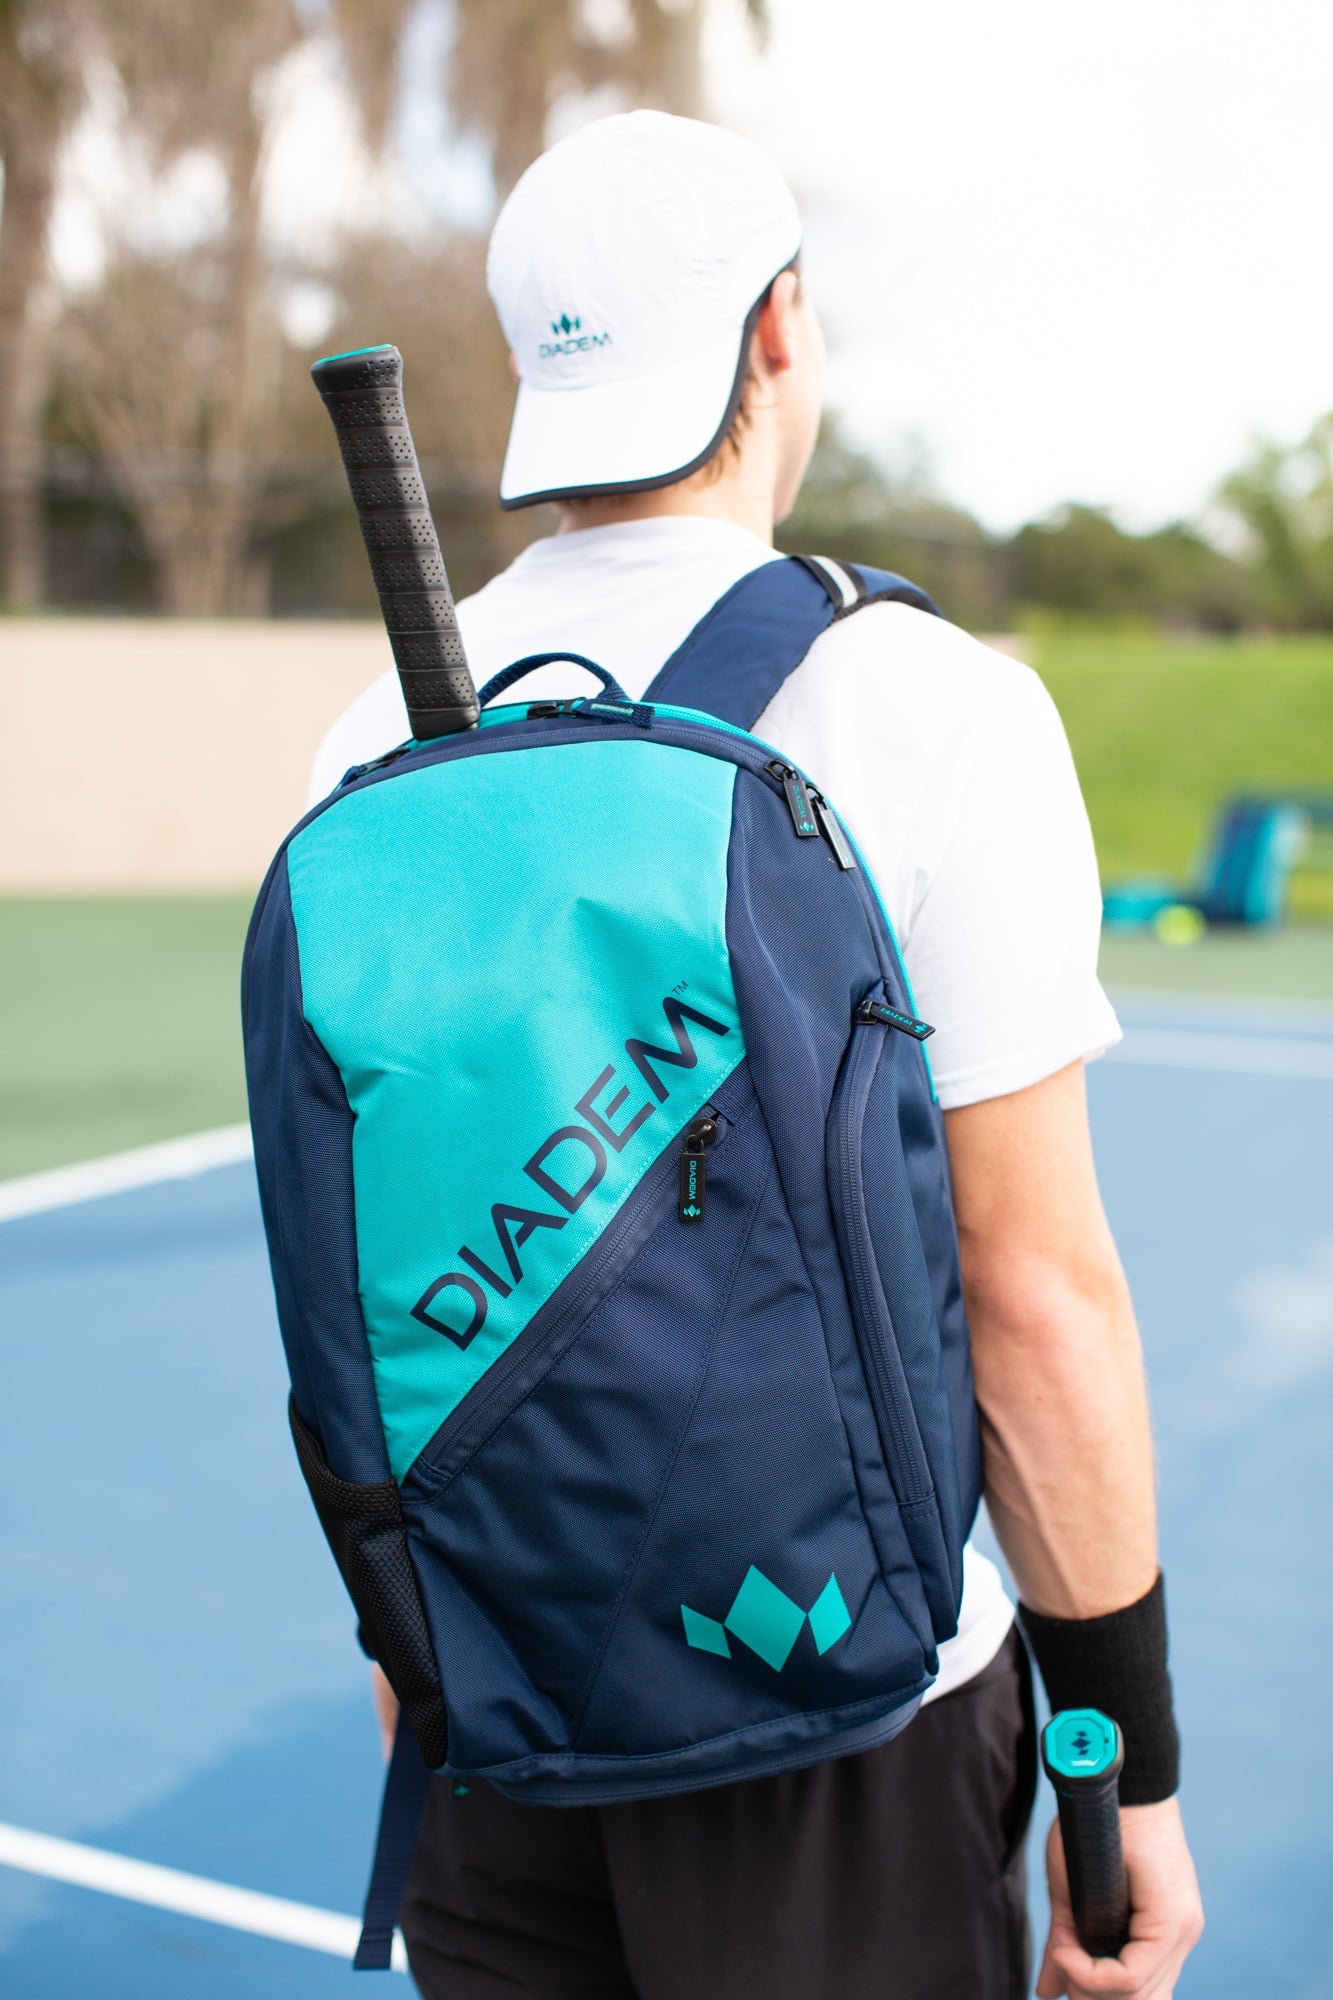 Diadem Tour Backpack Elevate Racket Bag (Teal/Navy) by Diadem Sports